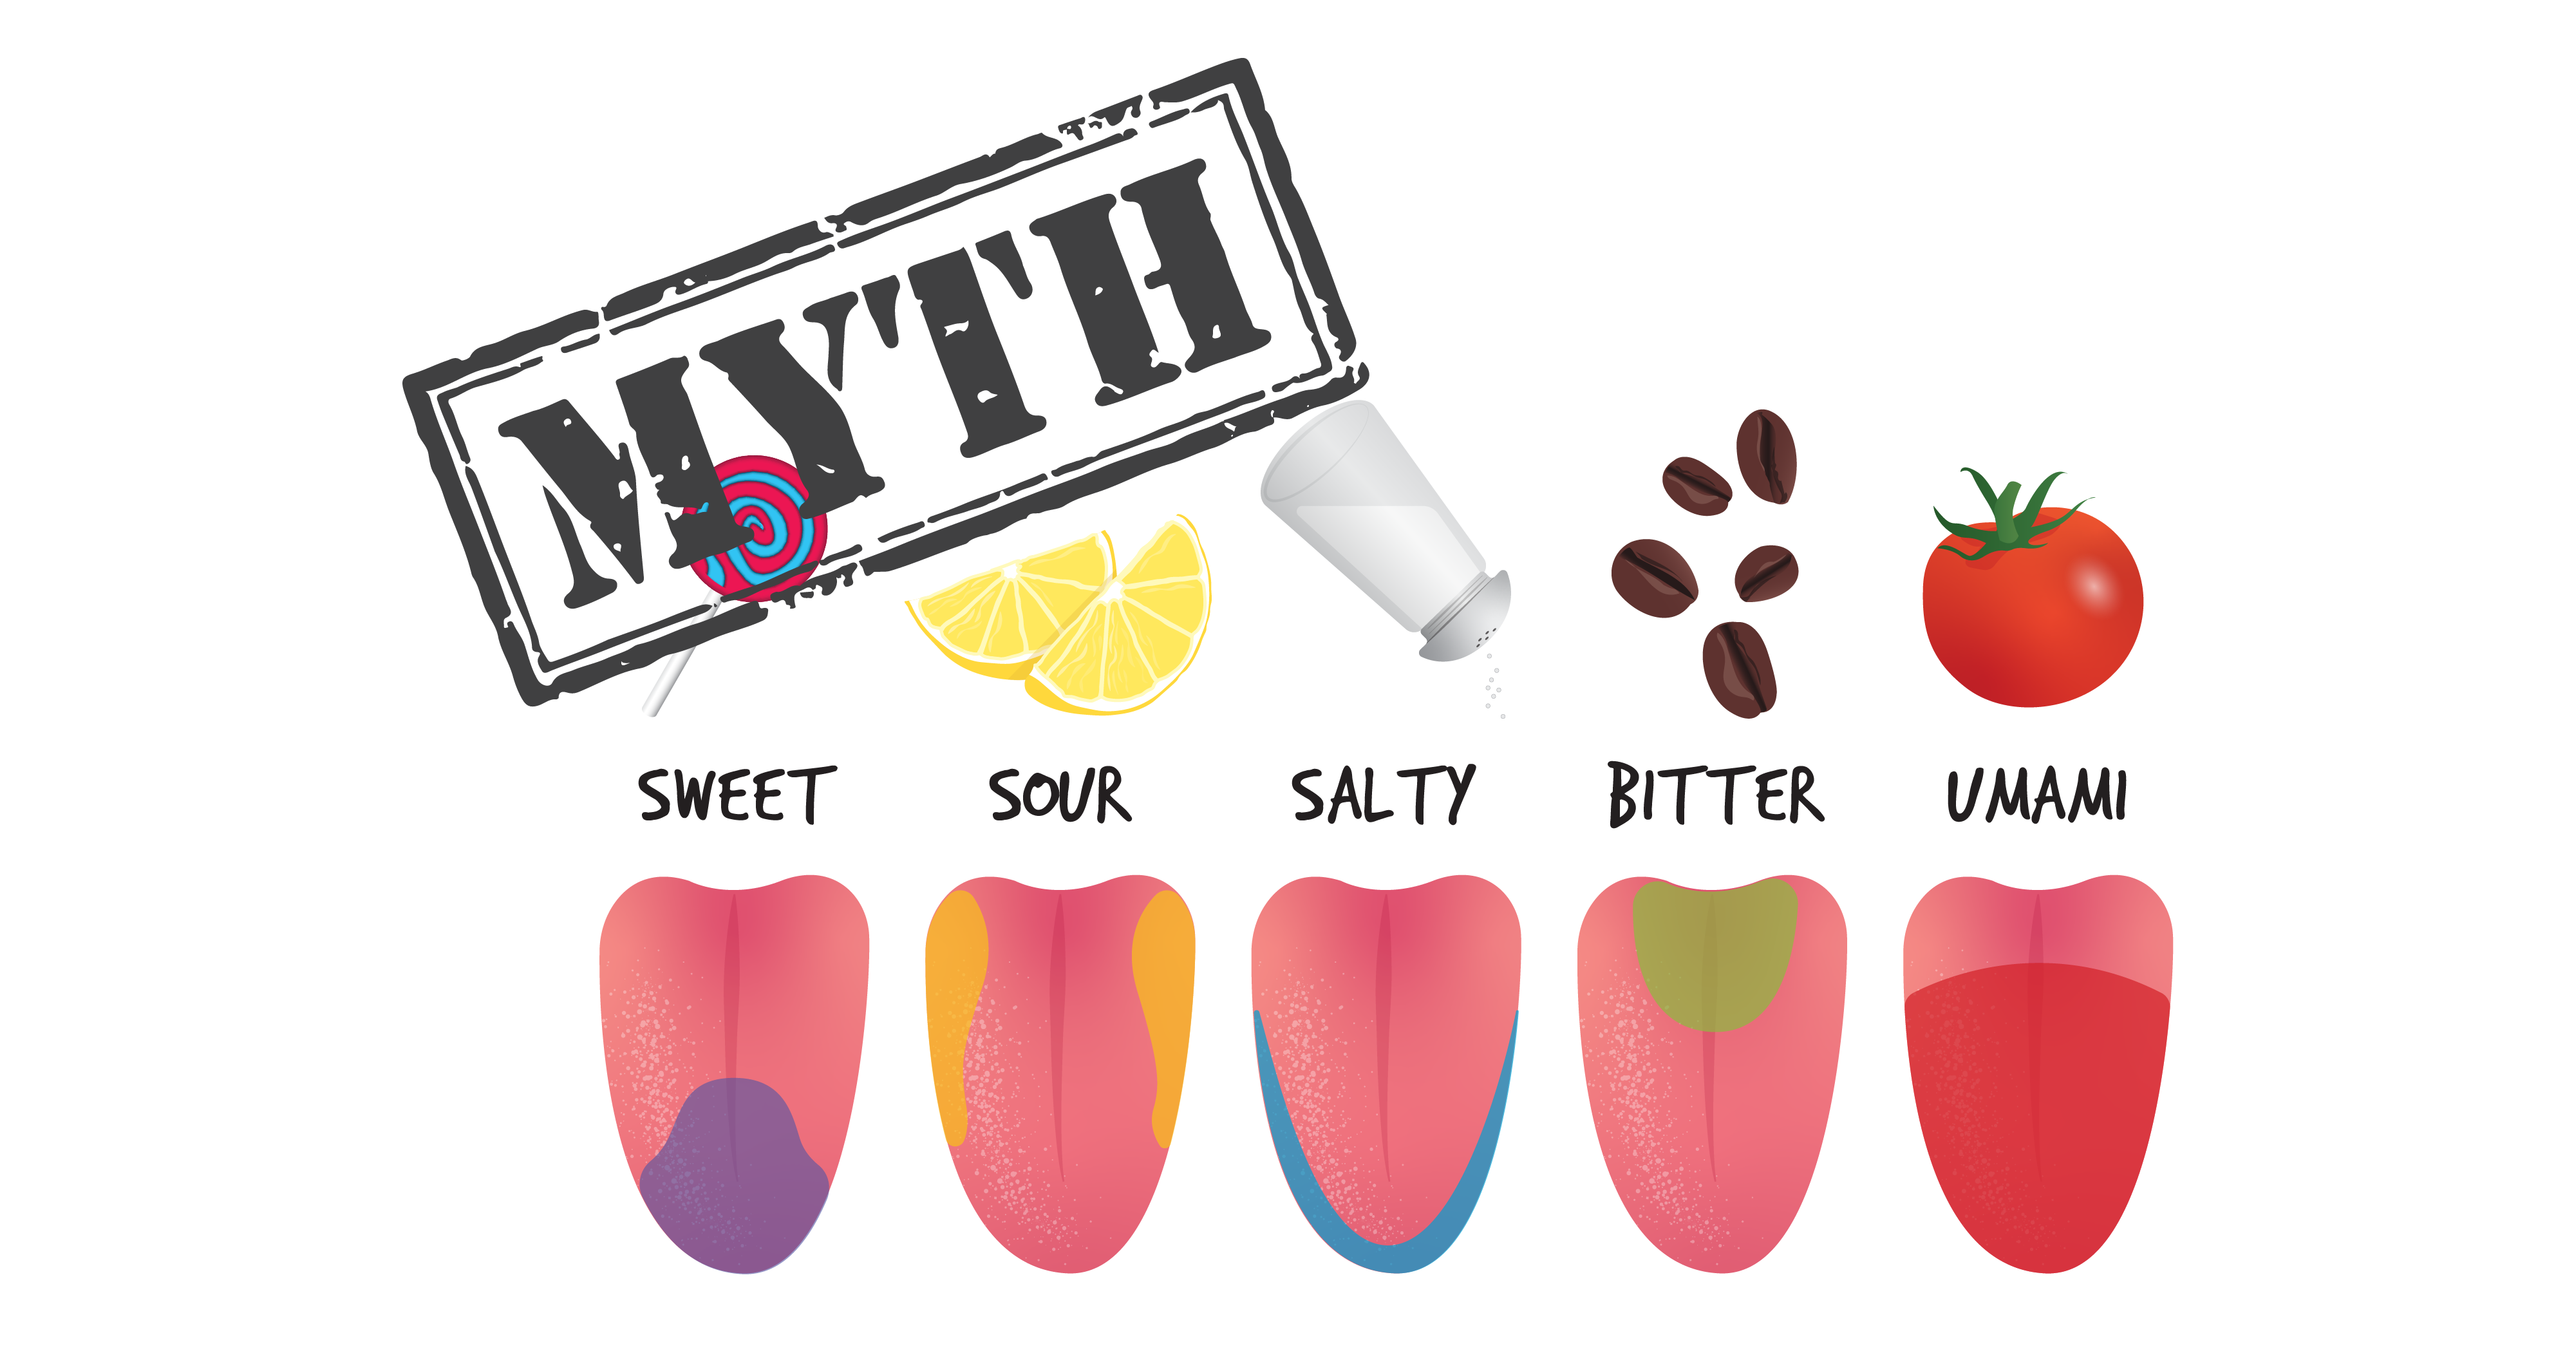 A series of 5 tongues, each with a type of taste. 1. Sweet. The bottom section of the tongue is highlighted with a lollipop icon. 2. Sour. The two sides of the tongue are highlighted with a lemon slice icon. 3. Salty. The front outline of the tongue is highlighted with a saltshaker icon. 4. Bitter. The center top of the tongue is highlighted with coffee bean icons. 5. Umami. Most of the bottom of the tongue is highlighted with a tomato icon. Large text on top left: MYTH.